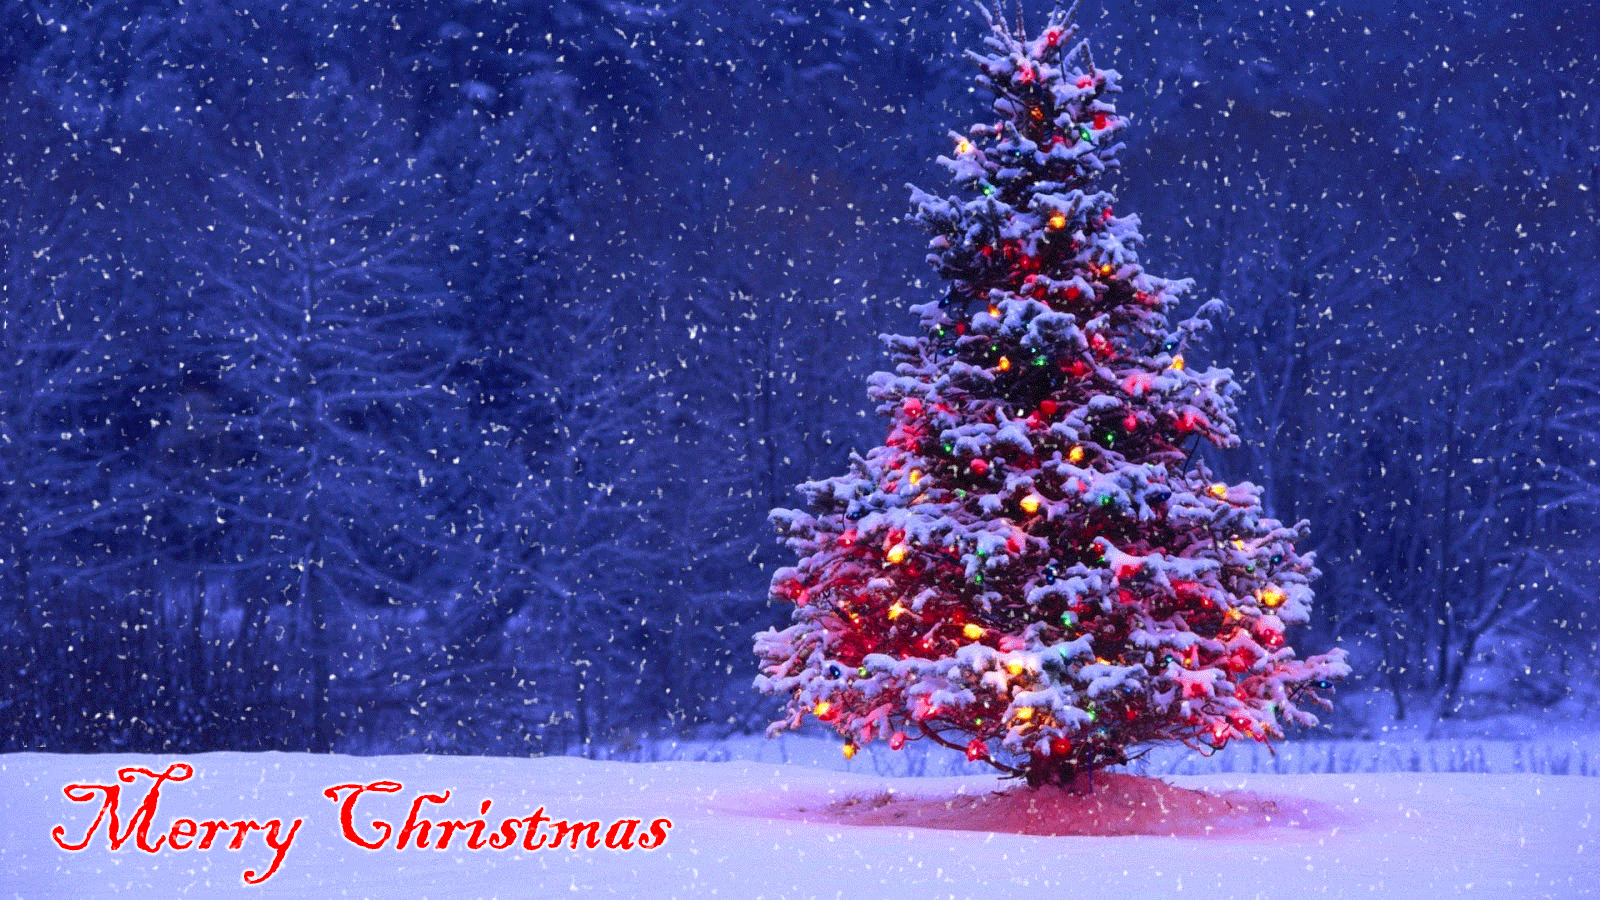 Merry Christmas Tree In Snowy Woods Animated Snow